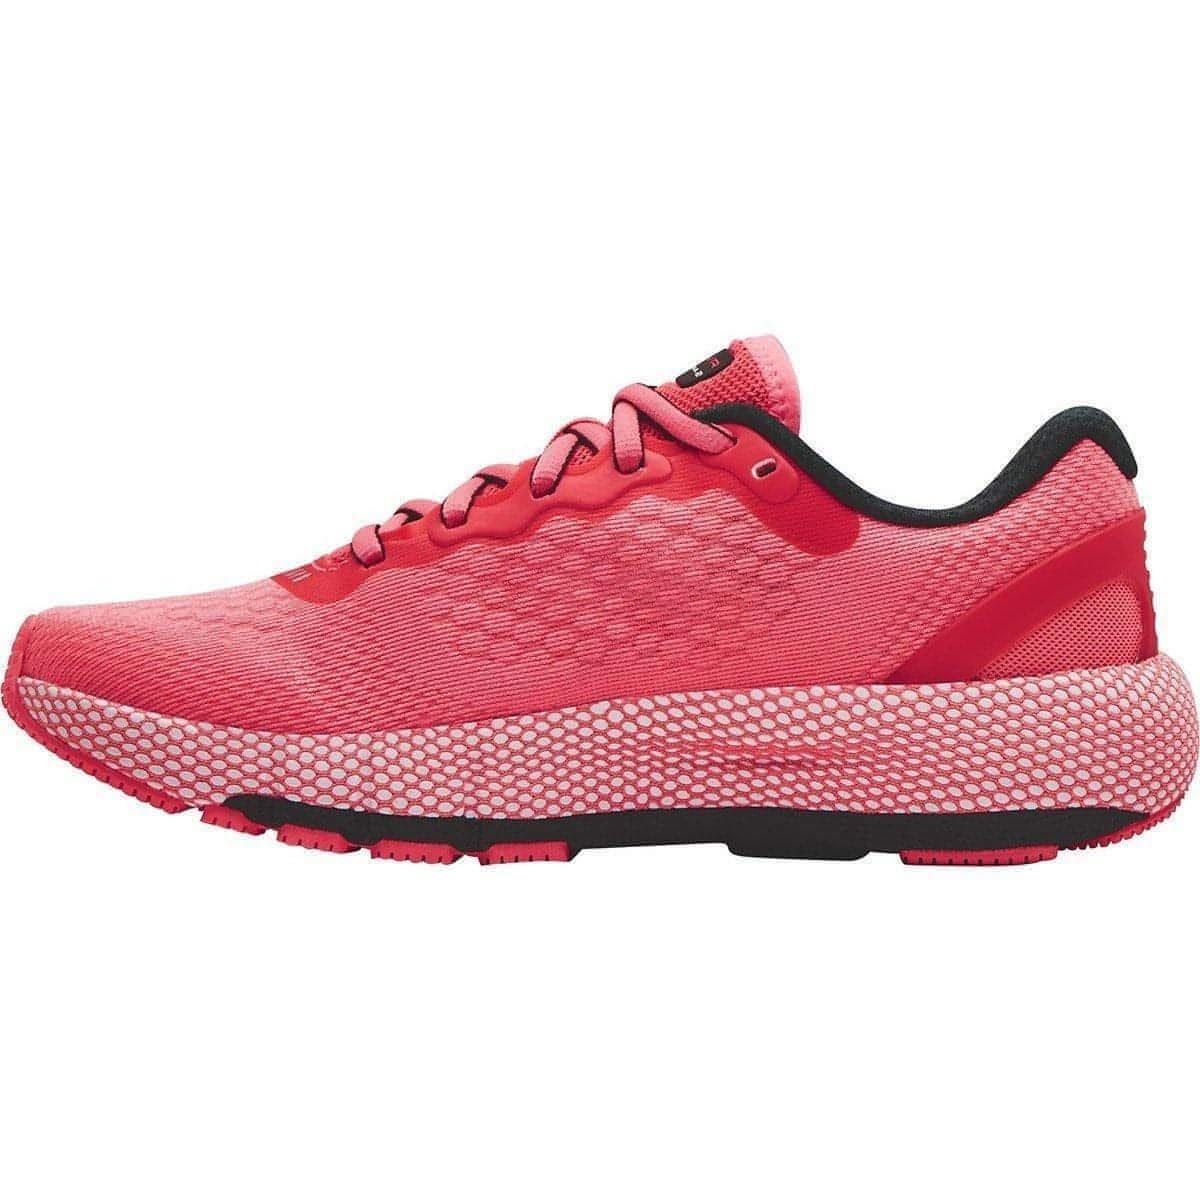 Under Armour HOVR Machina 2 Womens Running Shoes - Pink - Start Fitness